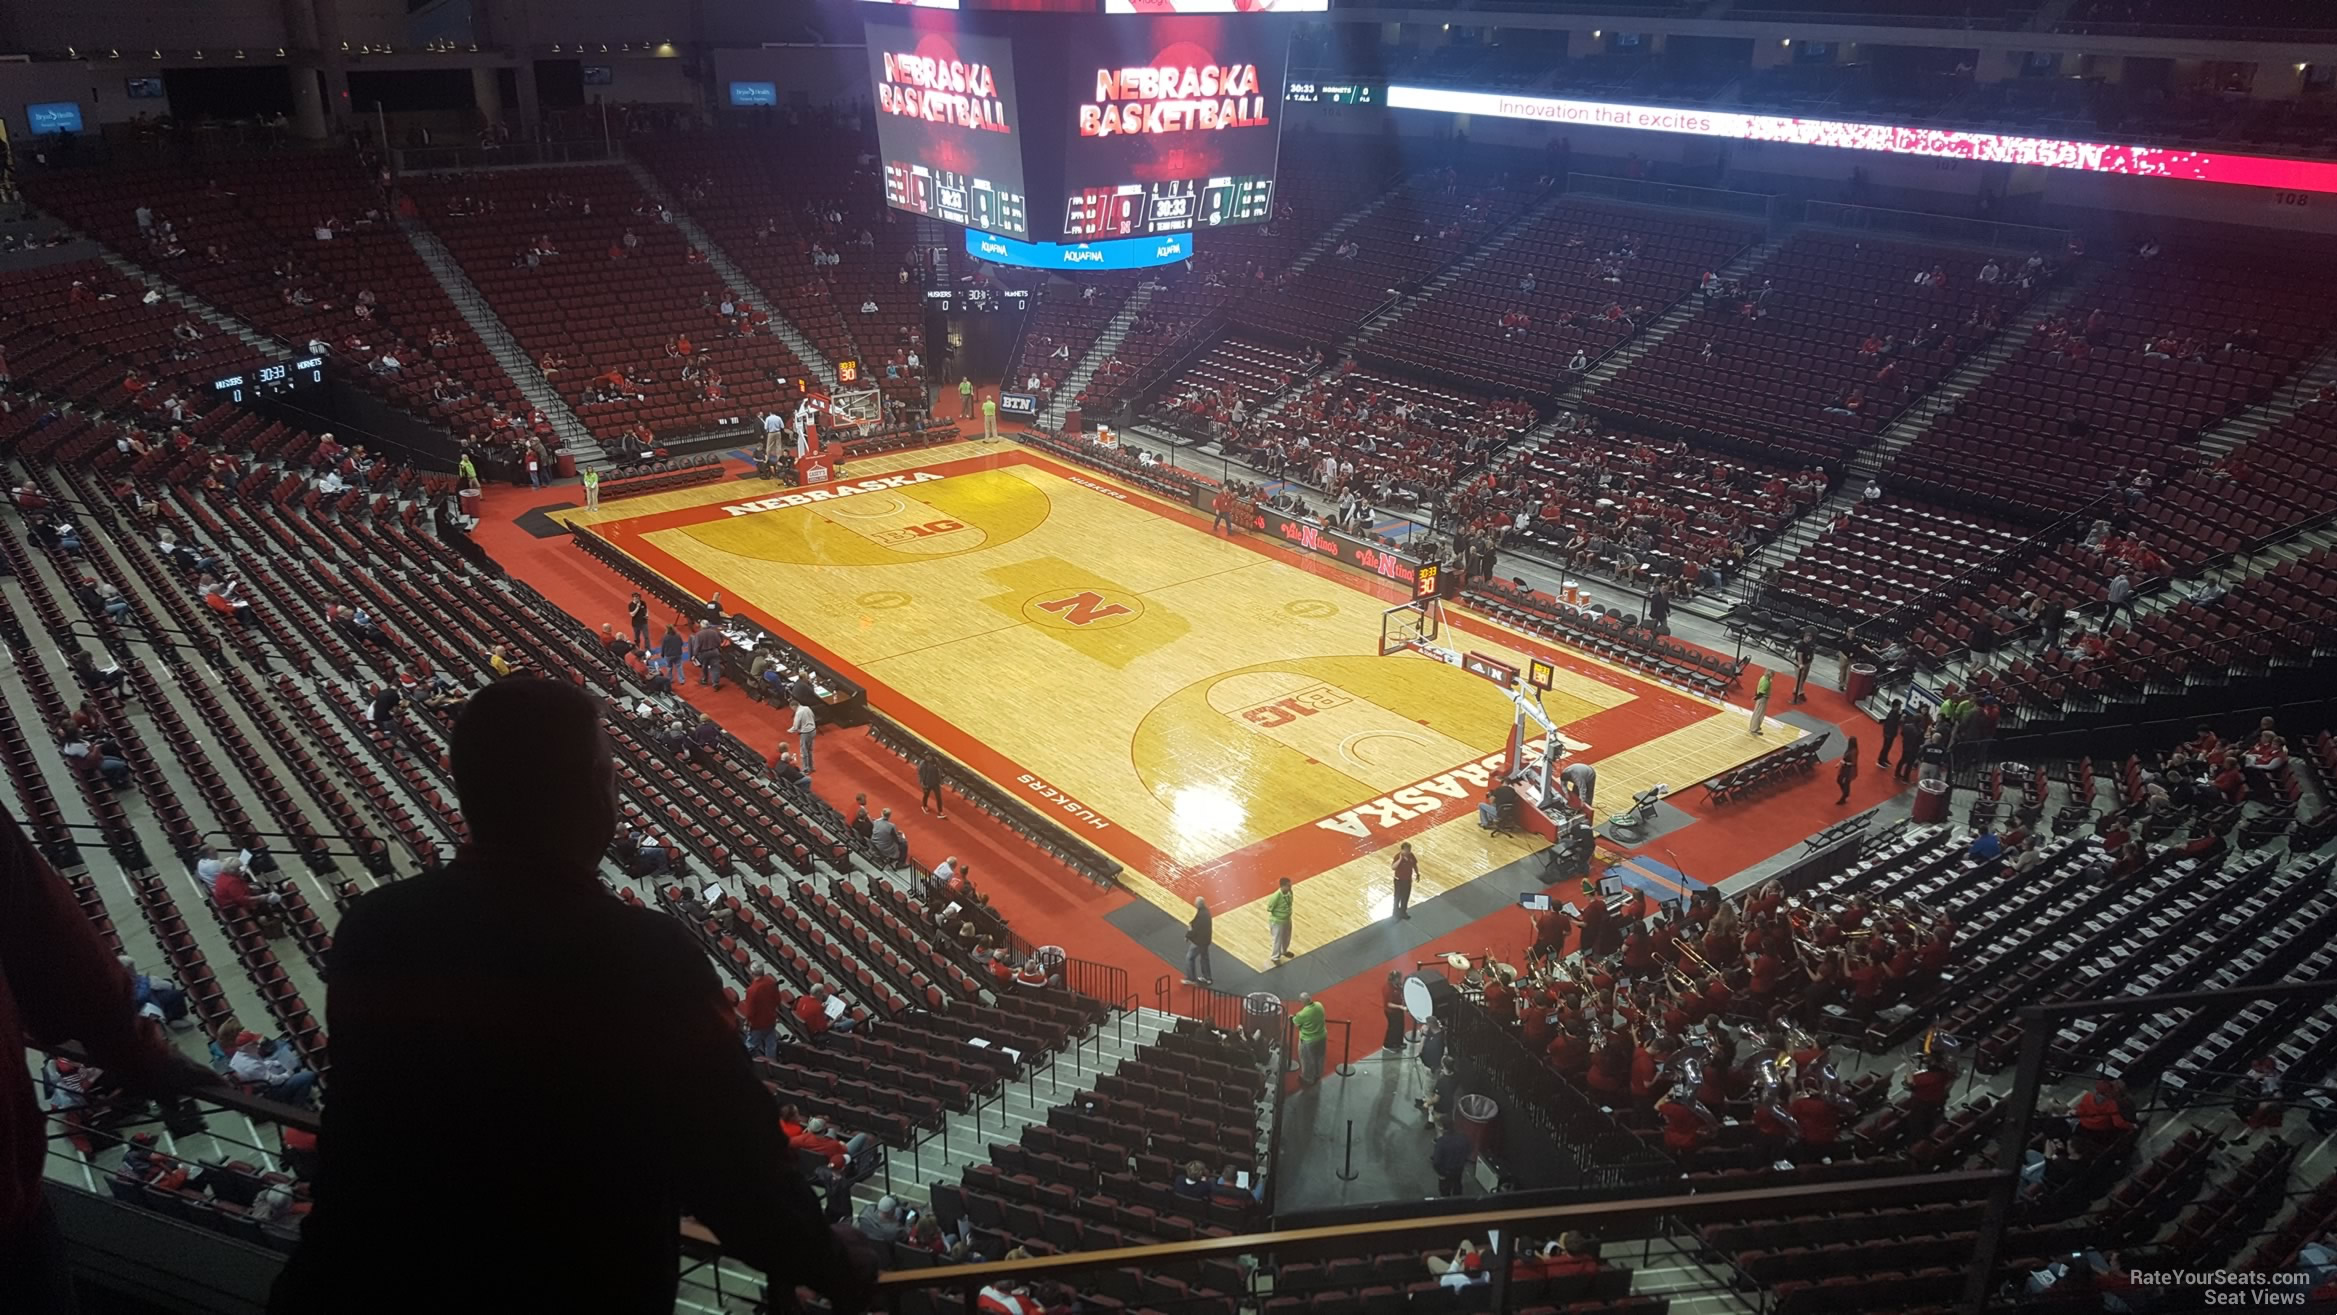 section 215, row 3 seat view  for basketball - pinnacle bank arena